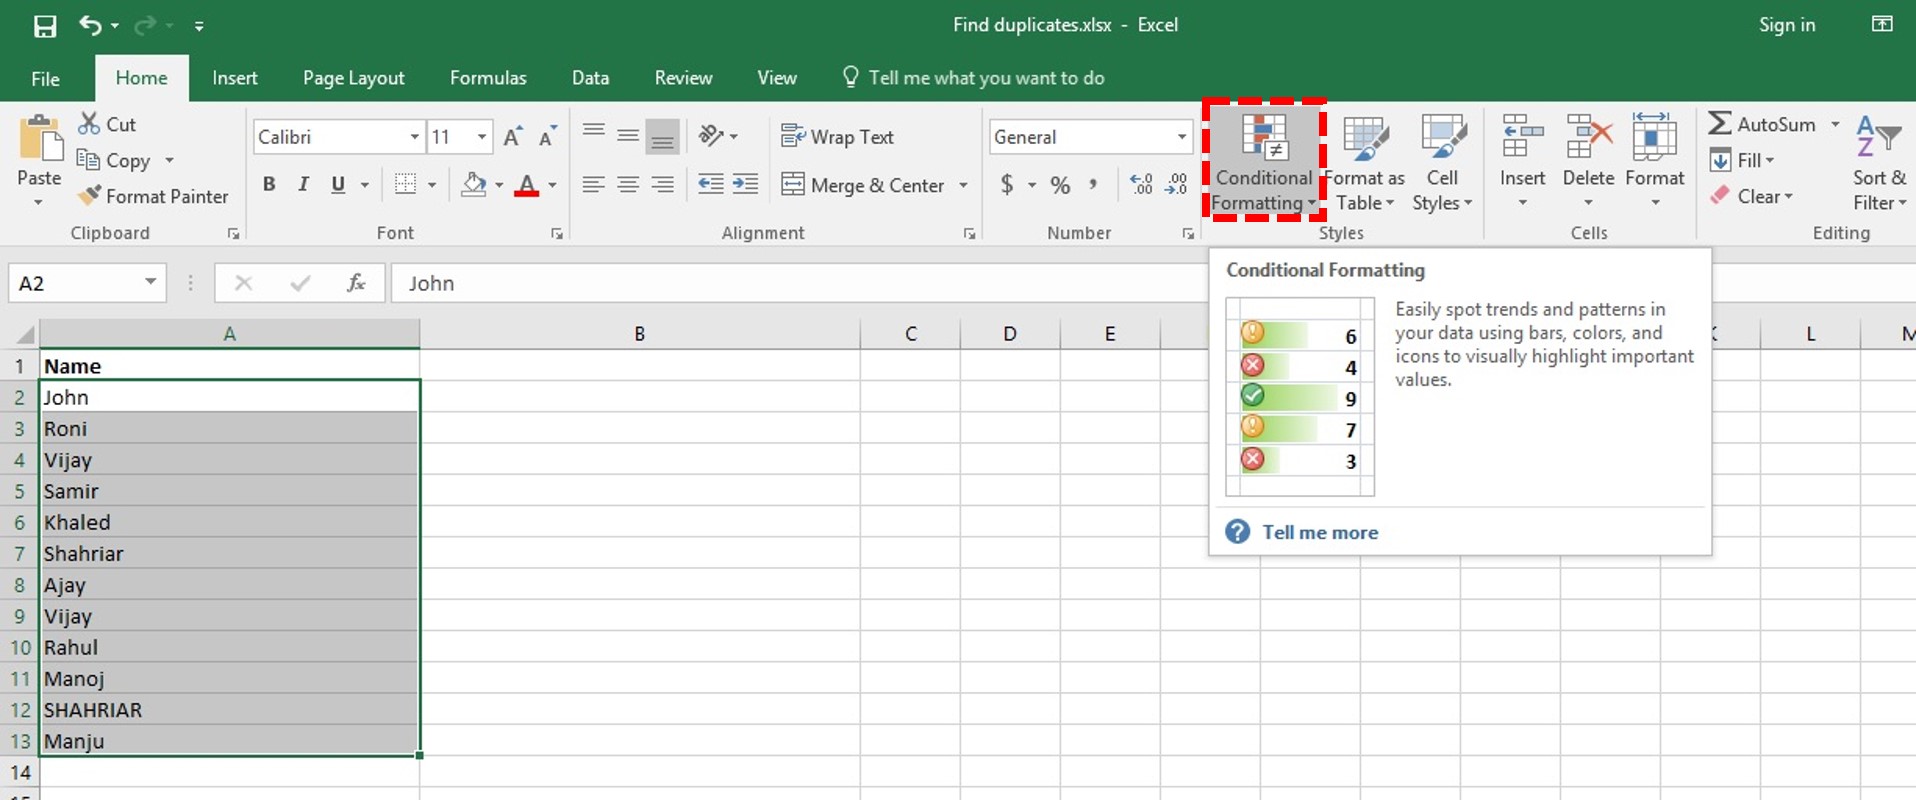 How to Find Duplicates in Excel in 3 Quick Steps